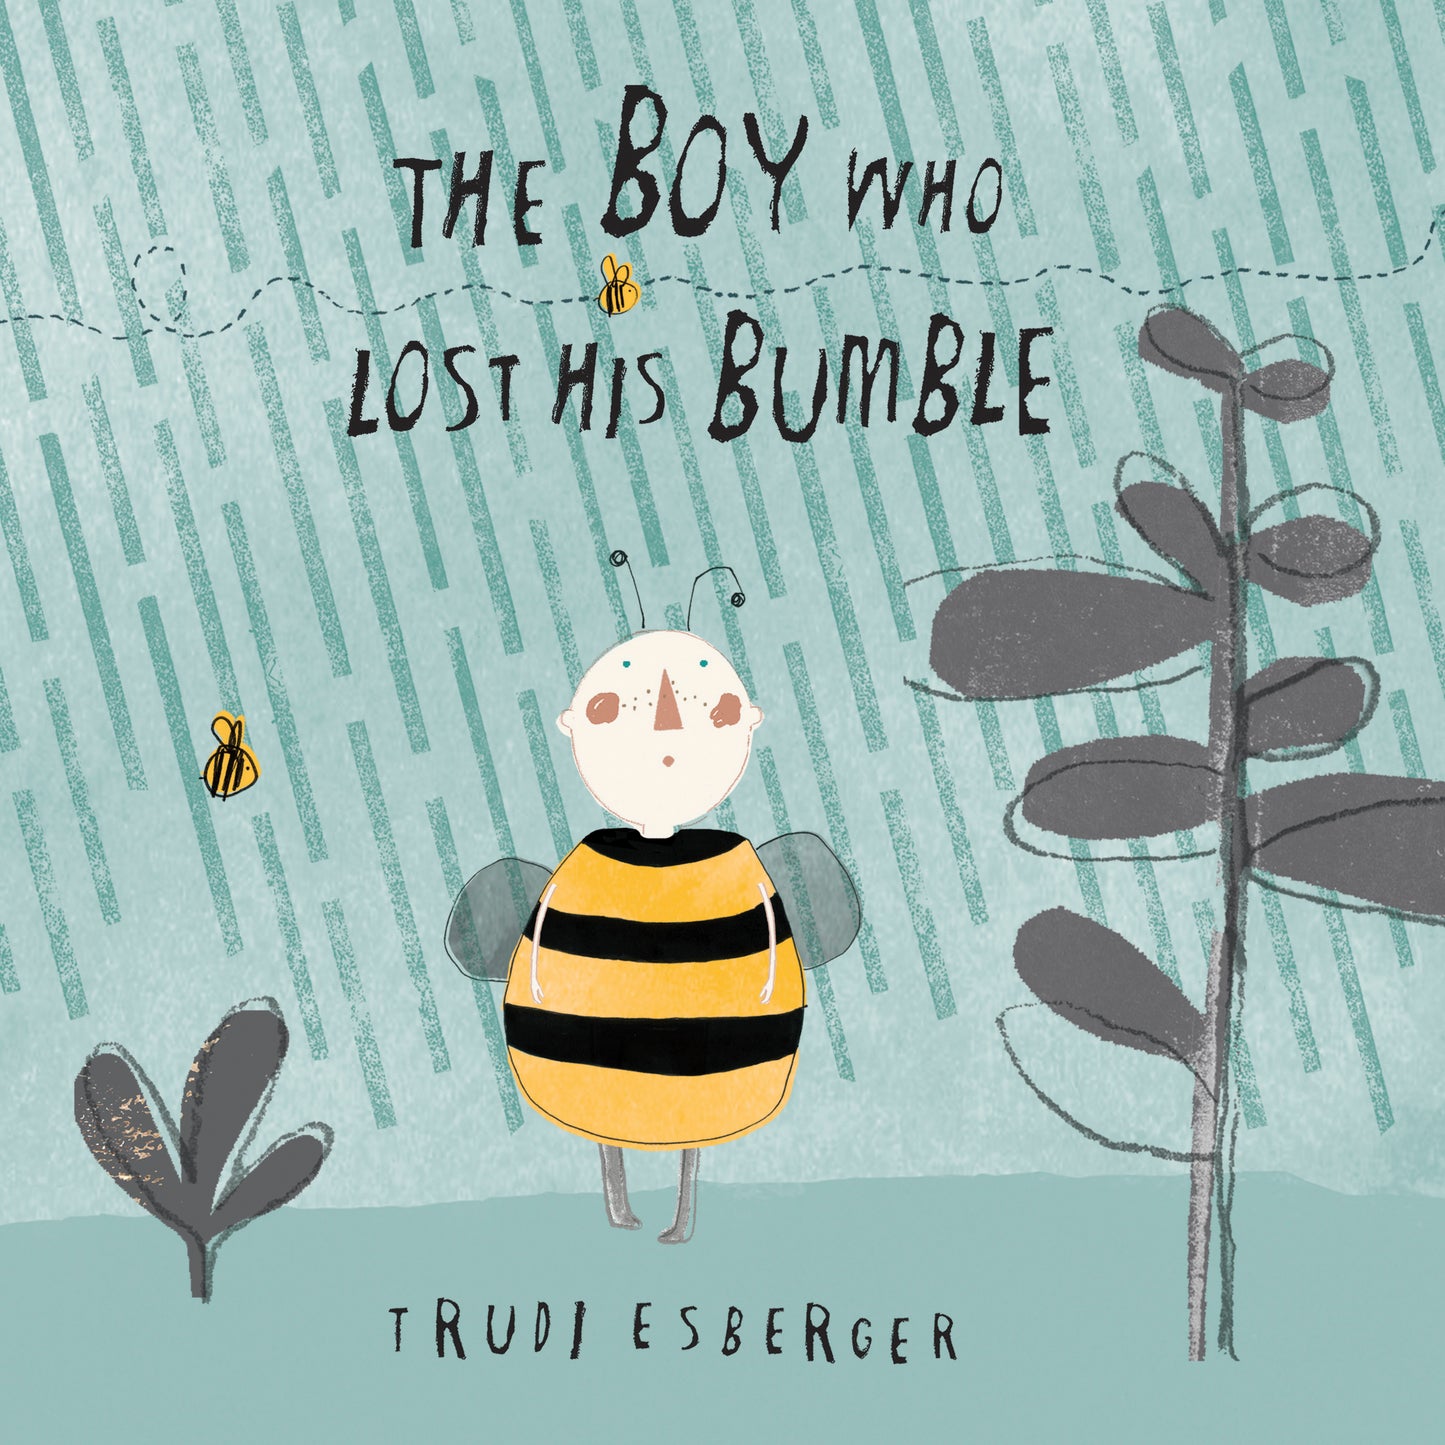 The Boy who lost his Bumble (Softcover Edition)